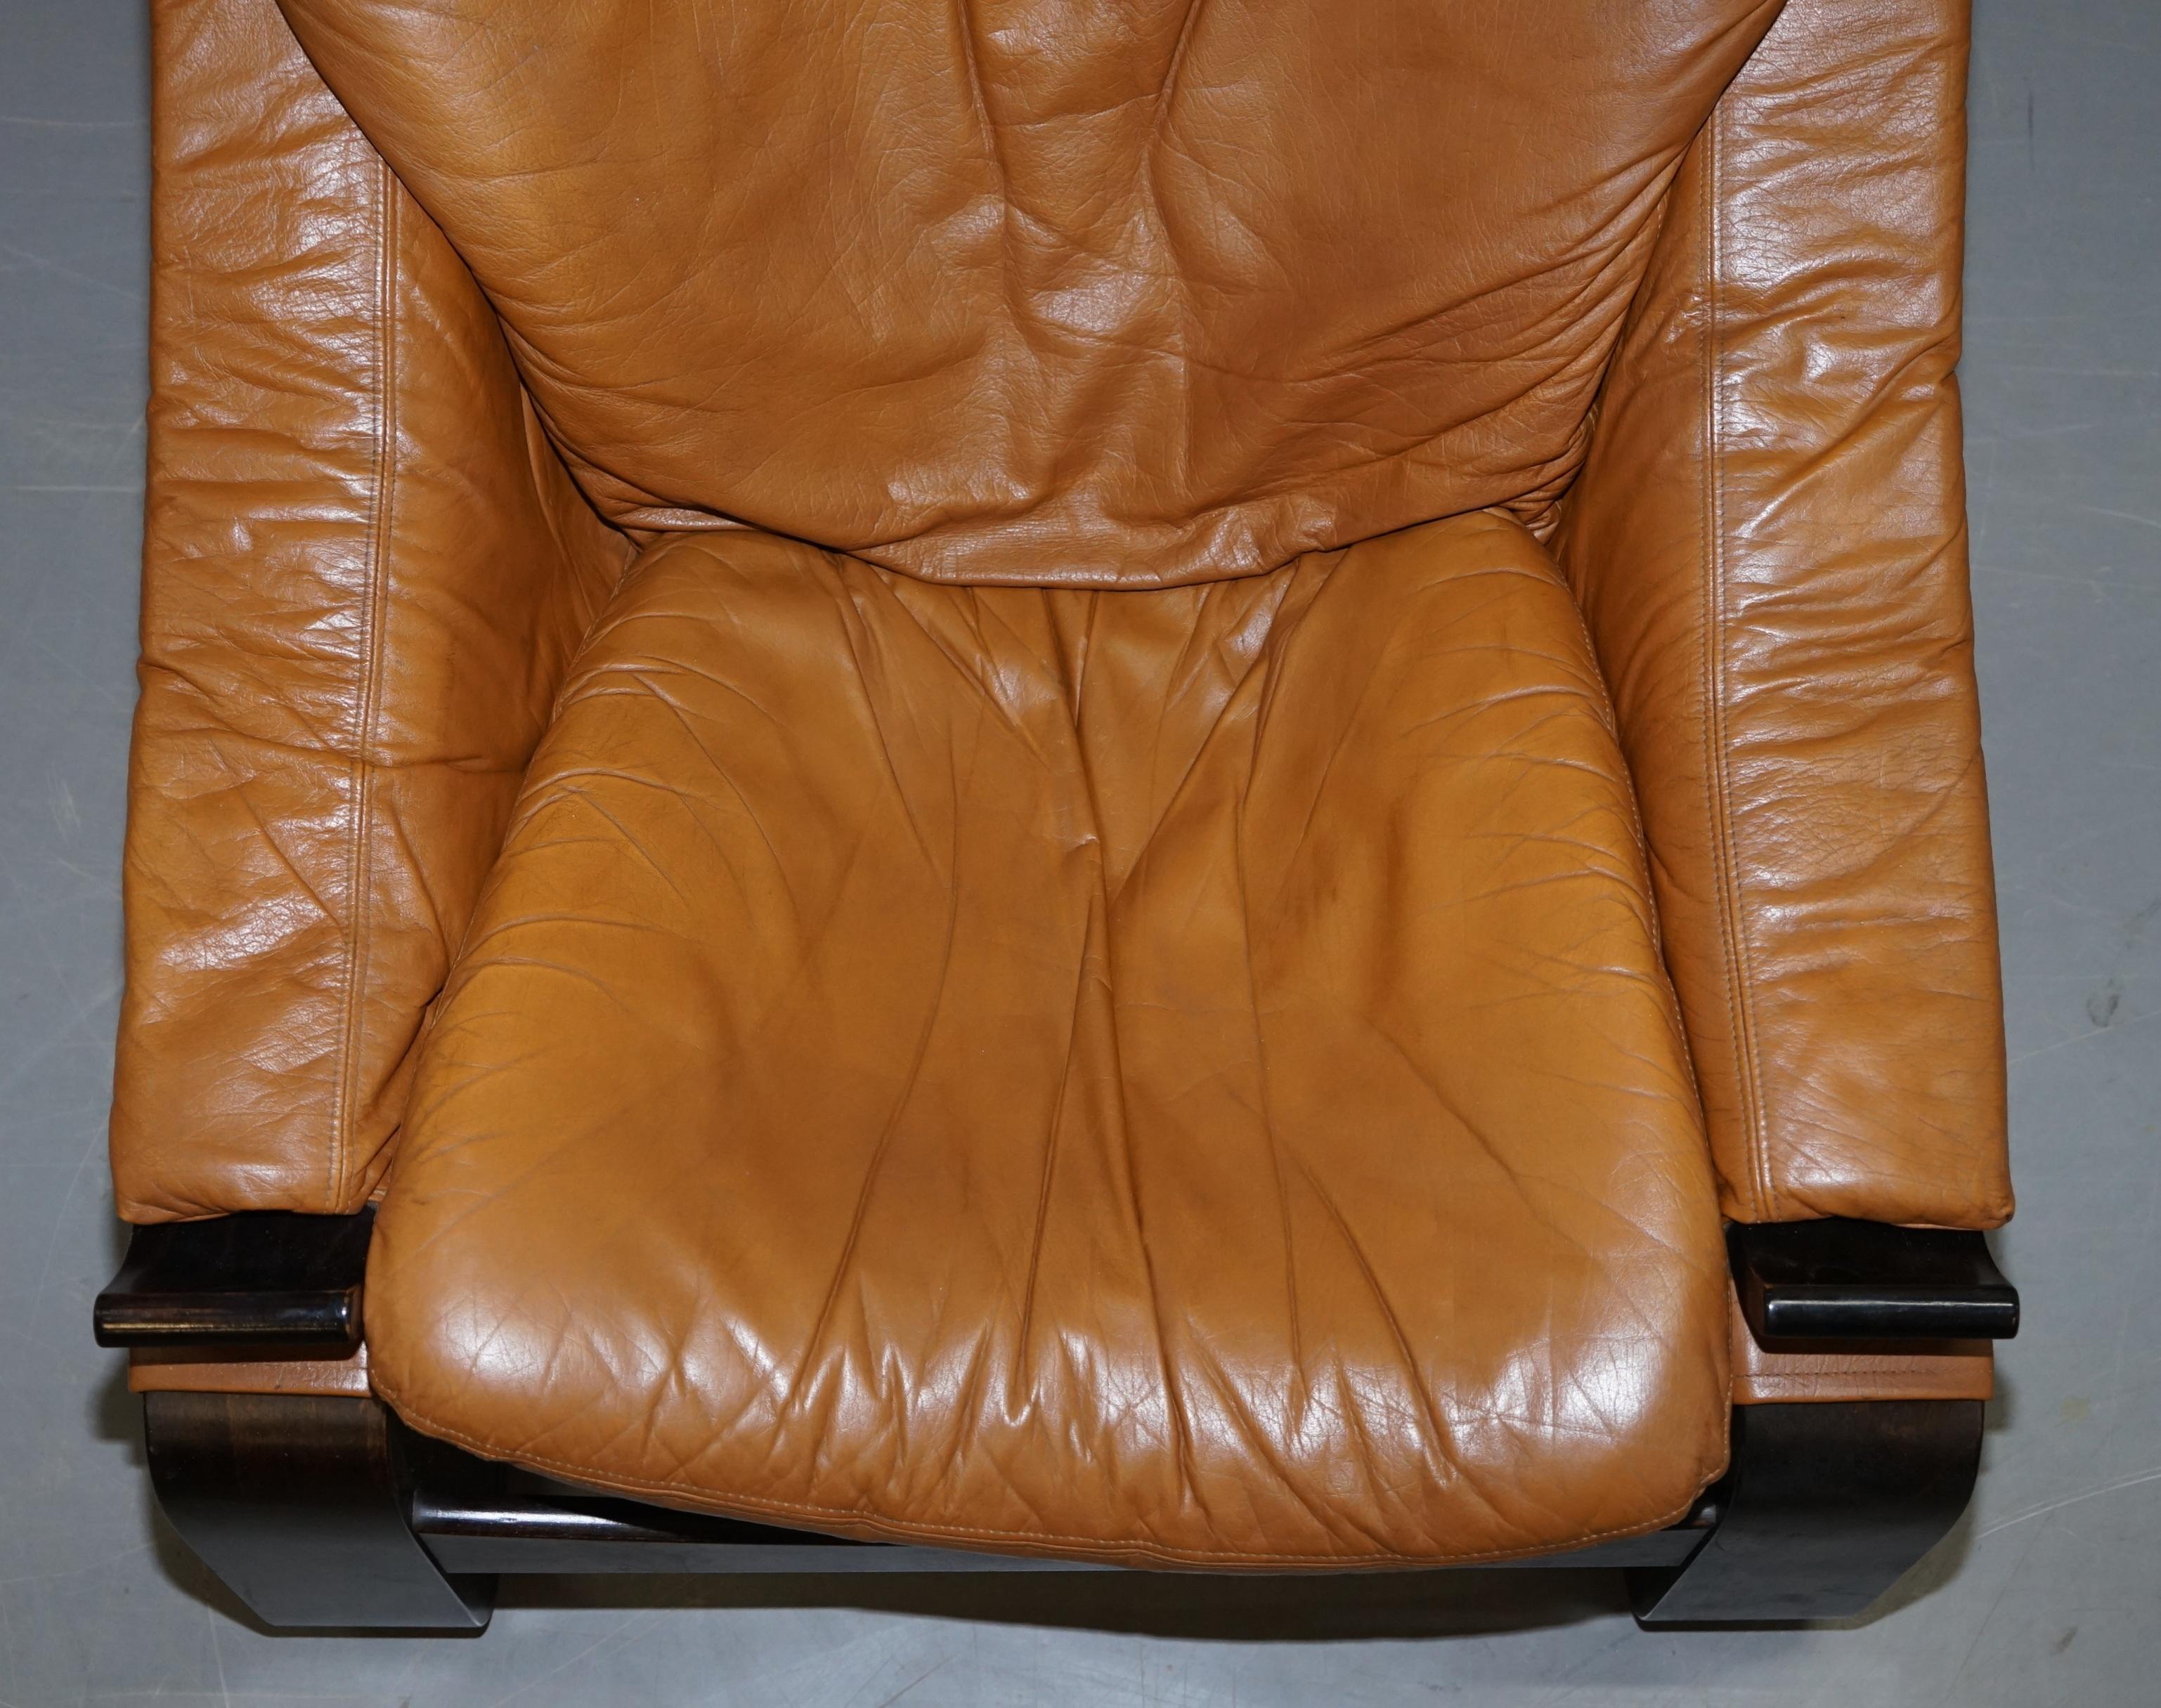 Pair of Midcentury Ake Fribytter Cognac Leather Nelo Mobel Sewdish Armchairs For Sale 7